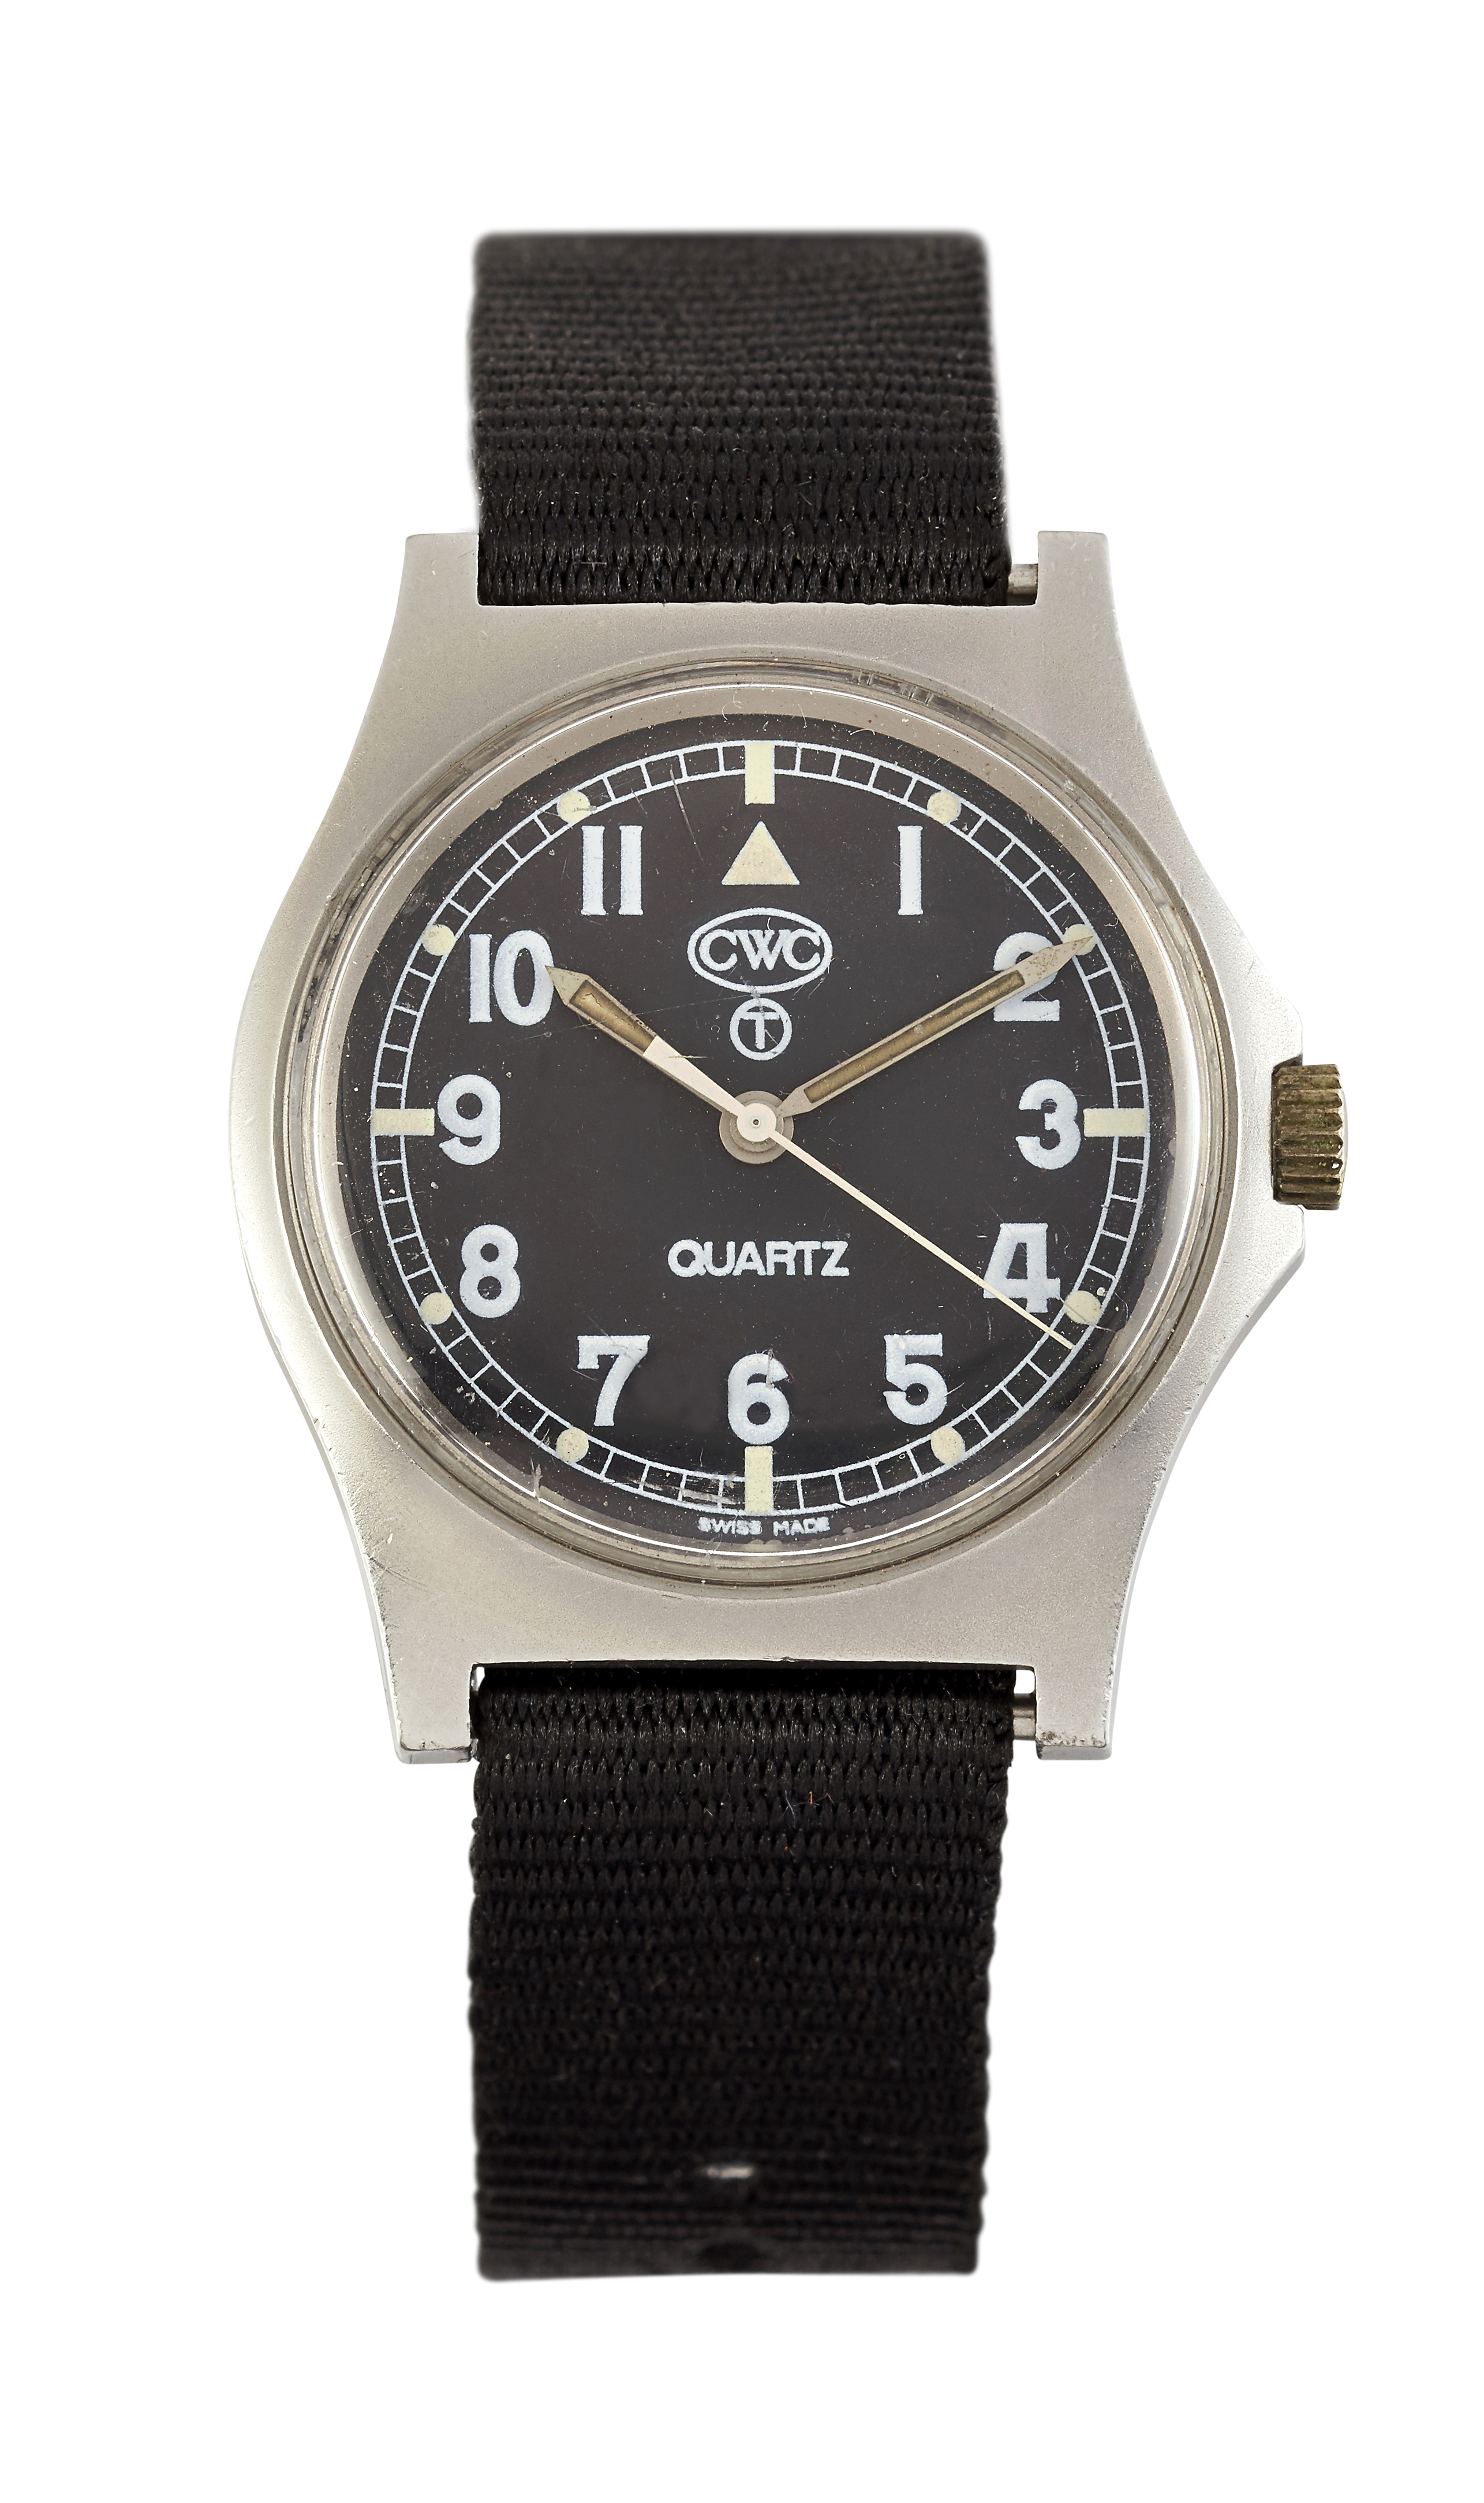 A CWC ROYAL NAVY ISSUE G10 WATCH